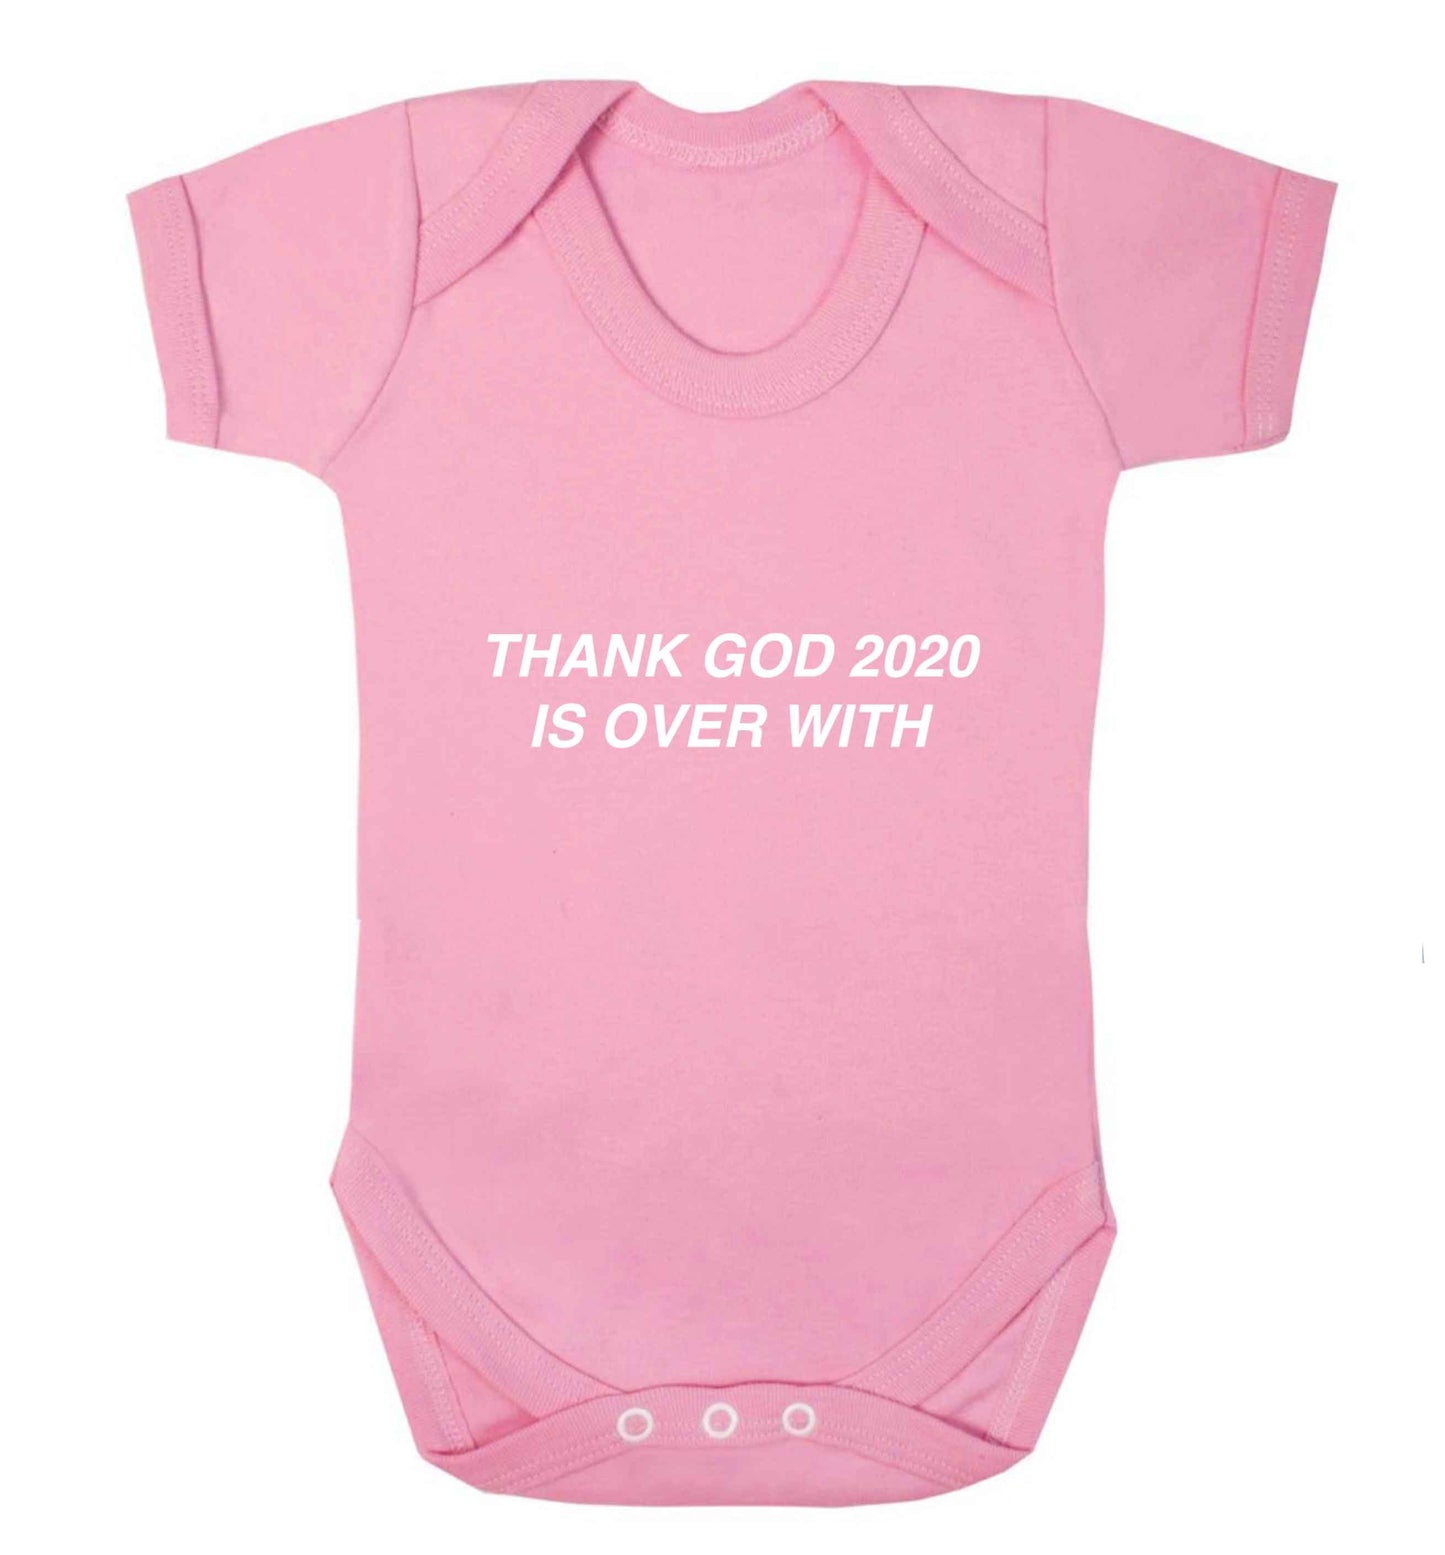 Thank god 2020 is over with baby vest pale pink 18-24 months